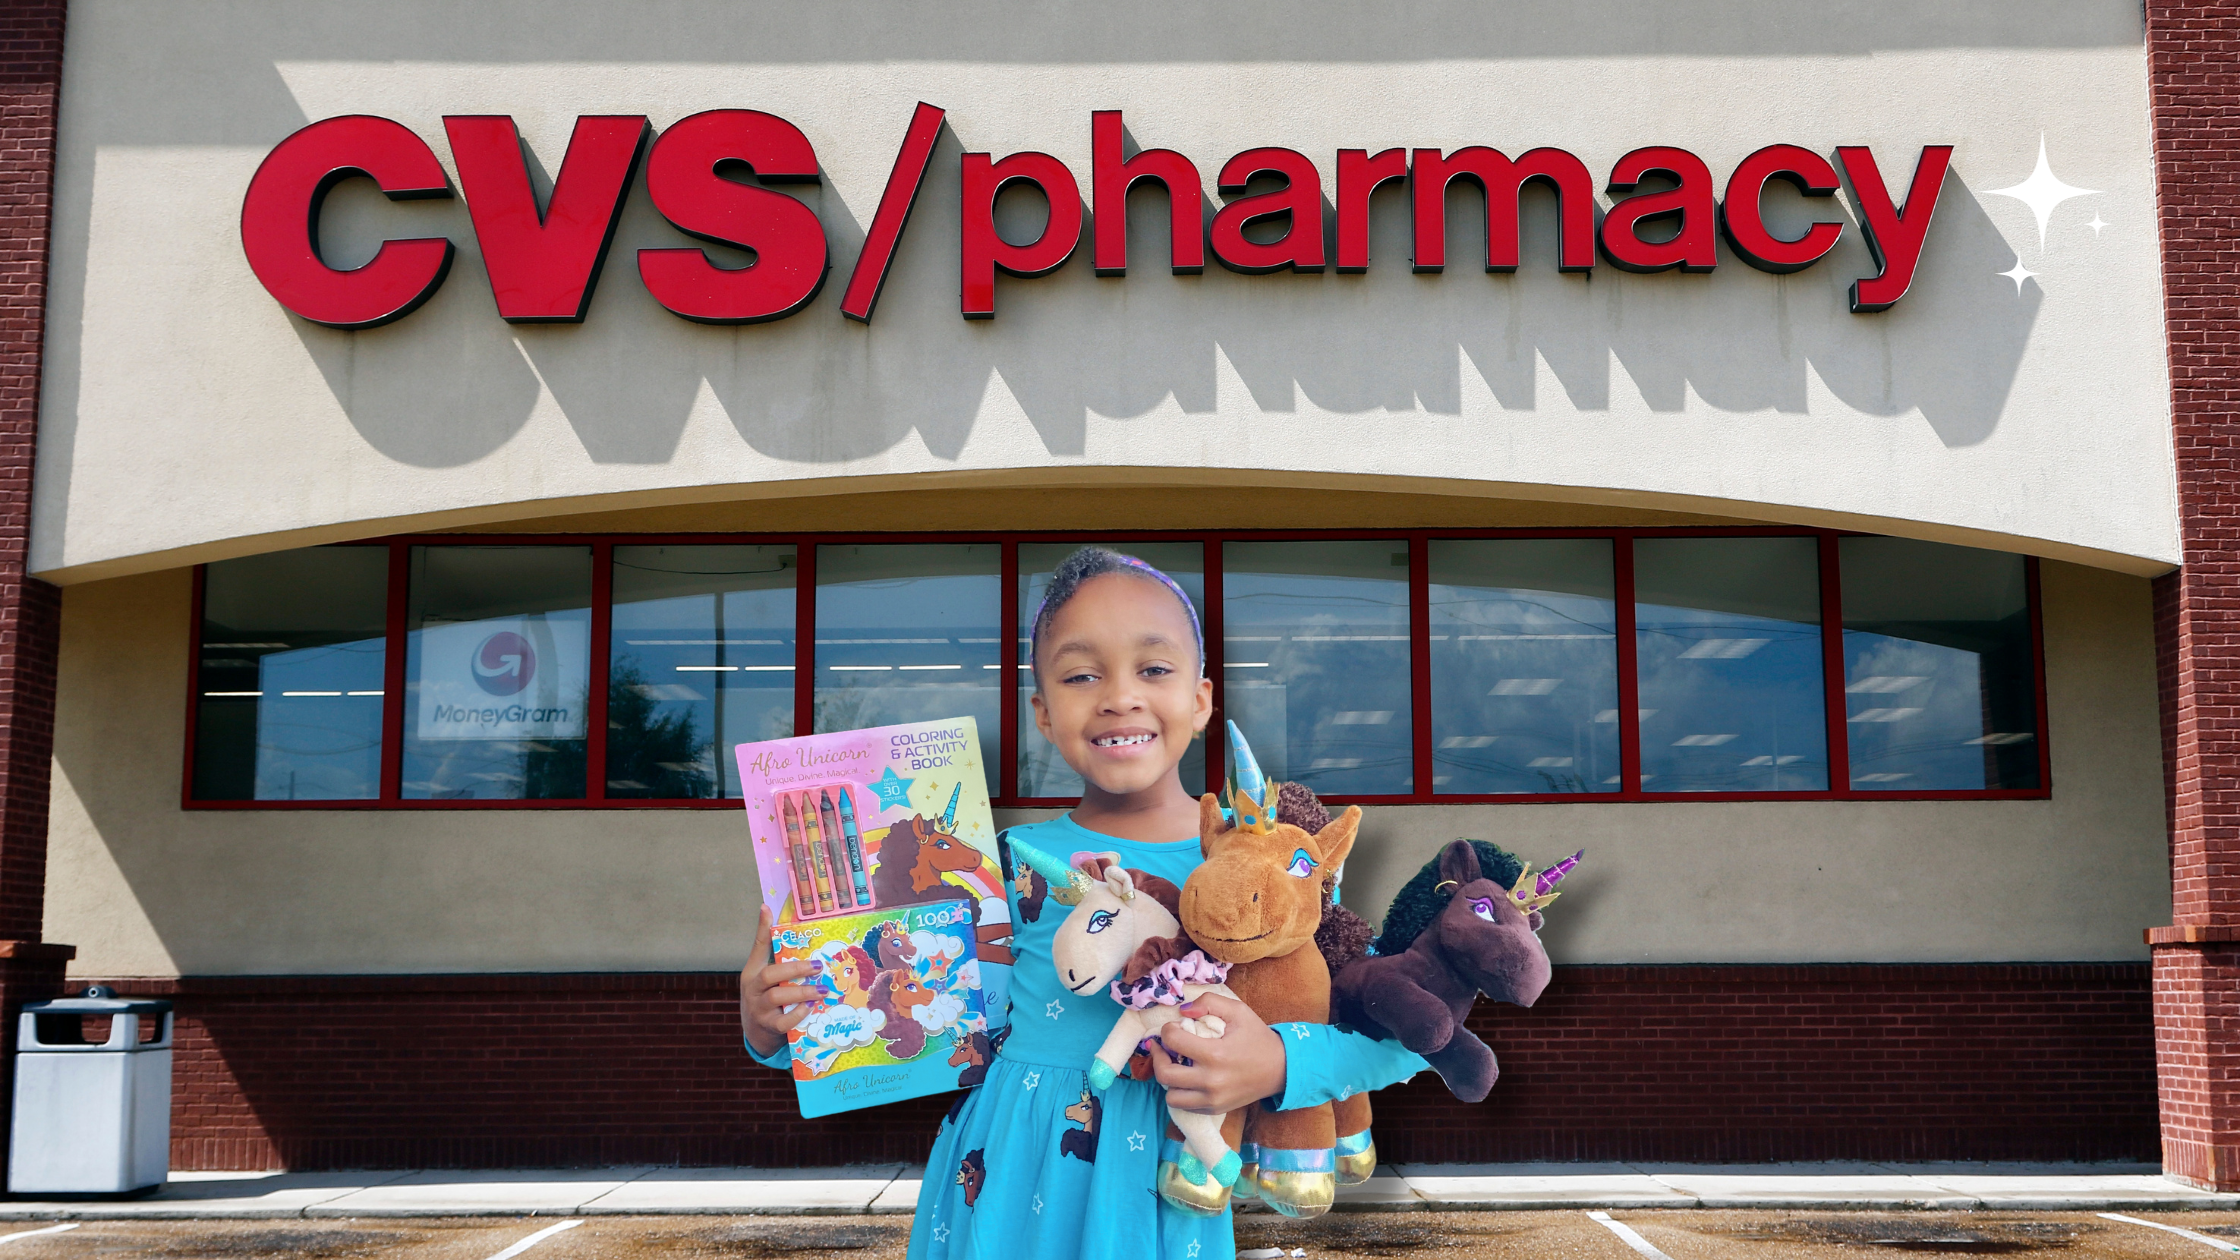 Fastest-Growing Black Lifestyle Brand Brings the Magic to CVS just in time for MLK Weekend, Black History Month, and Valentine’s Day